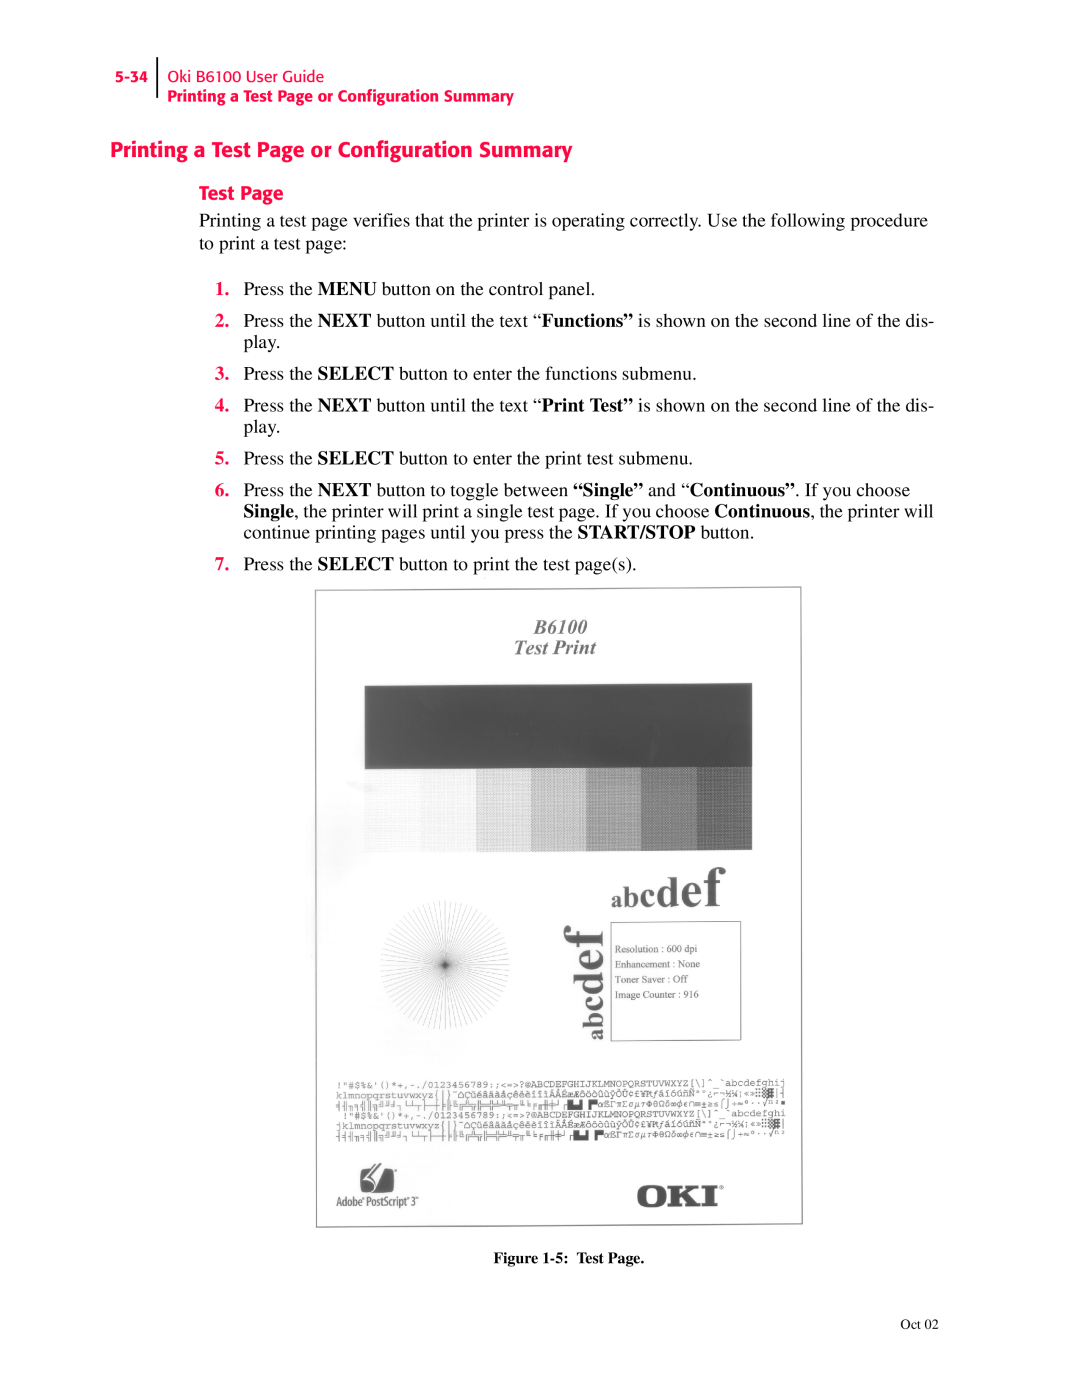 Oki 6100 manual Printing a Test Page or Configuration Summary 